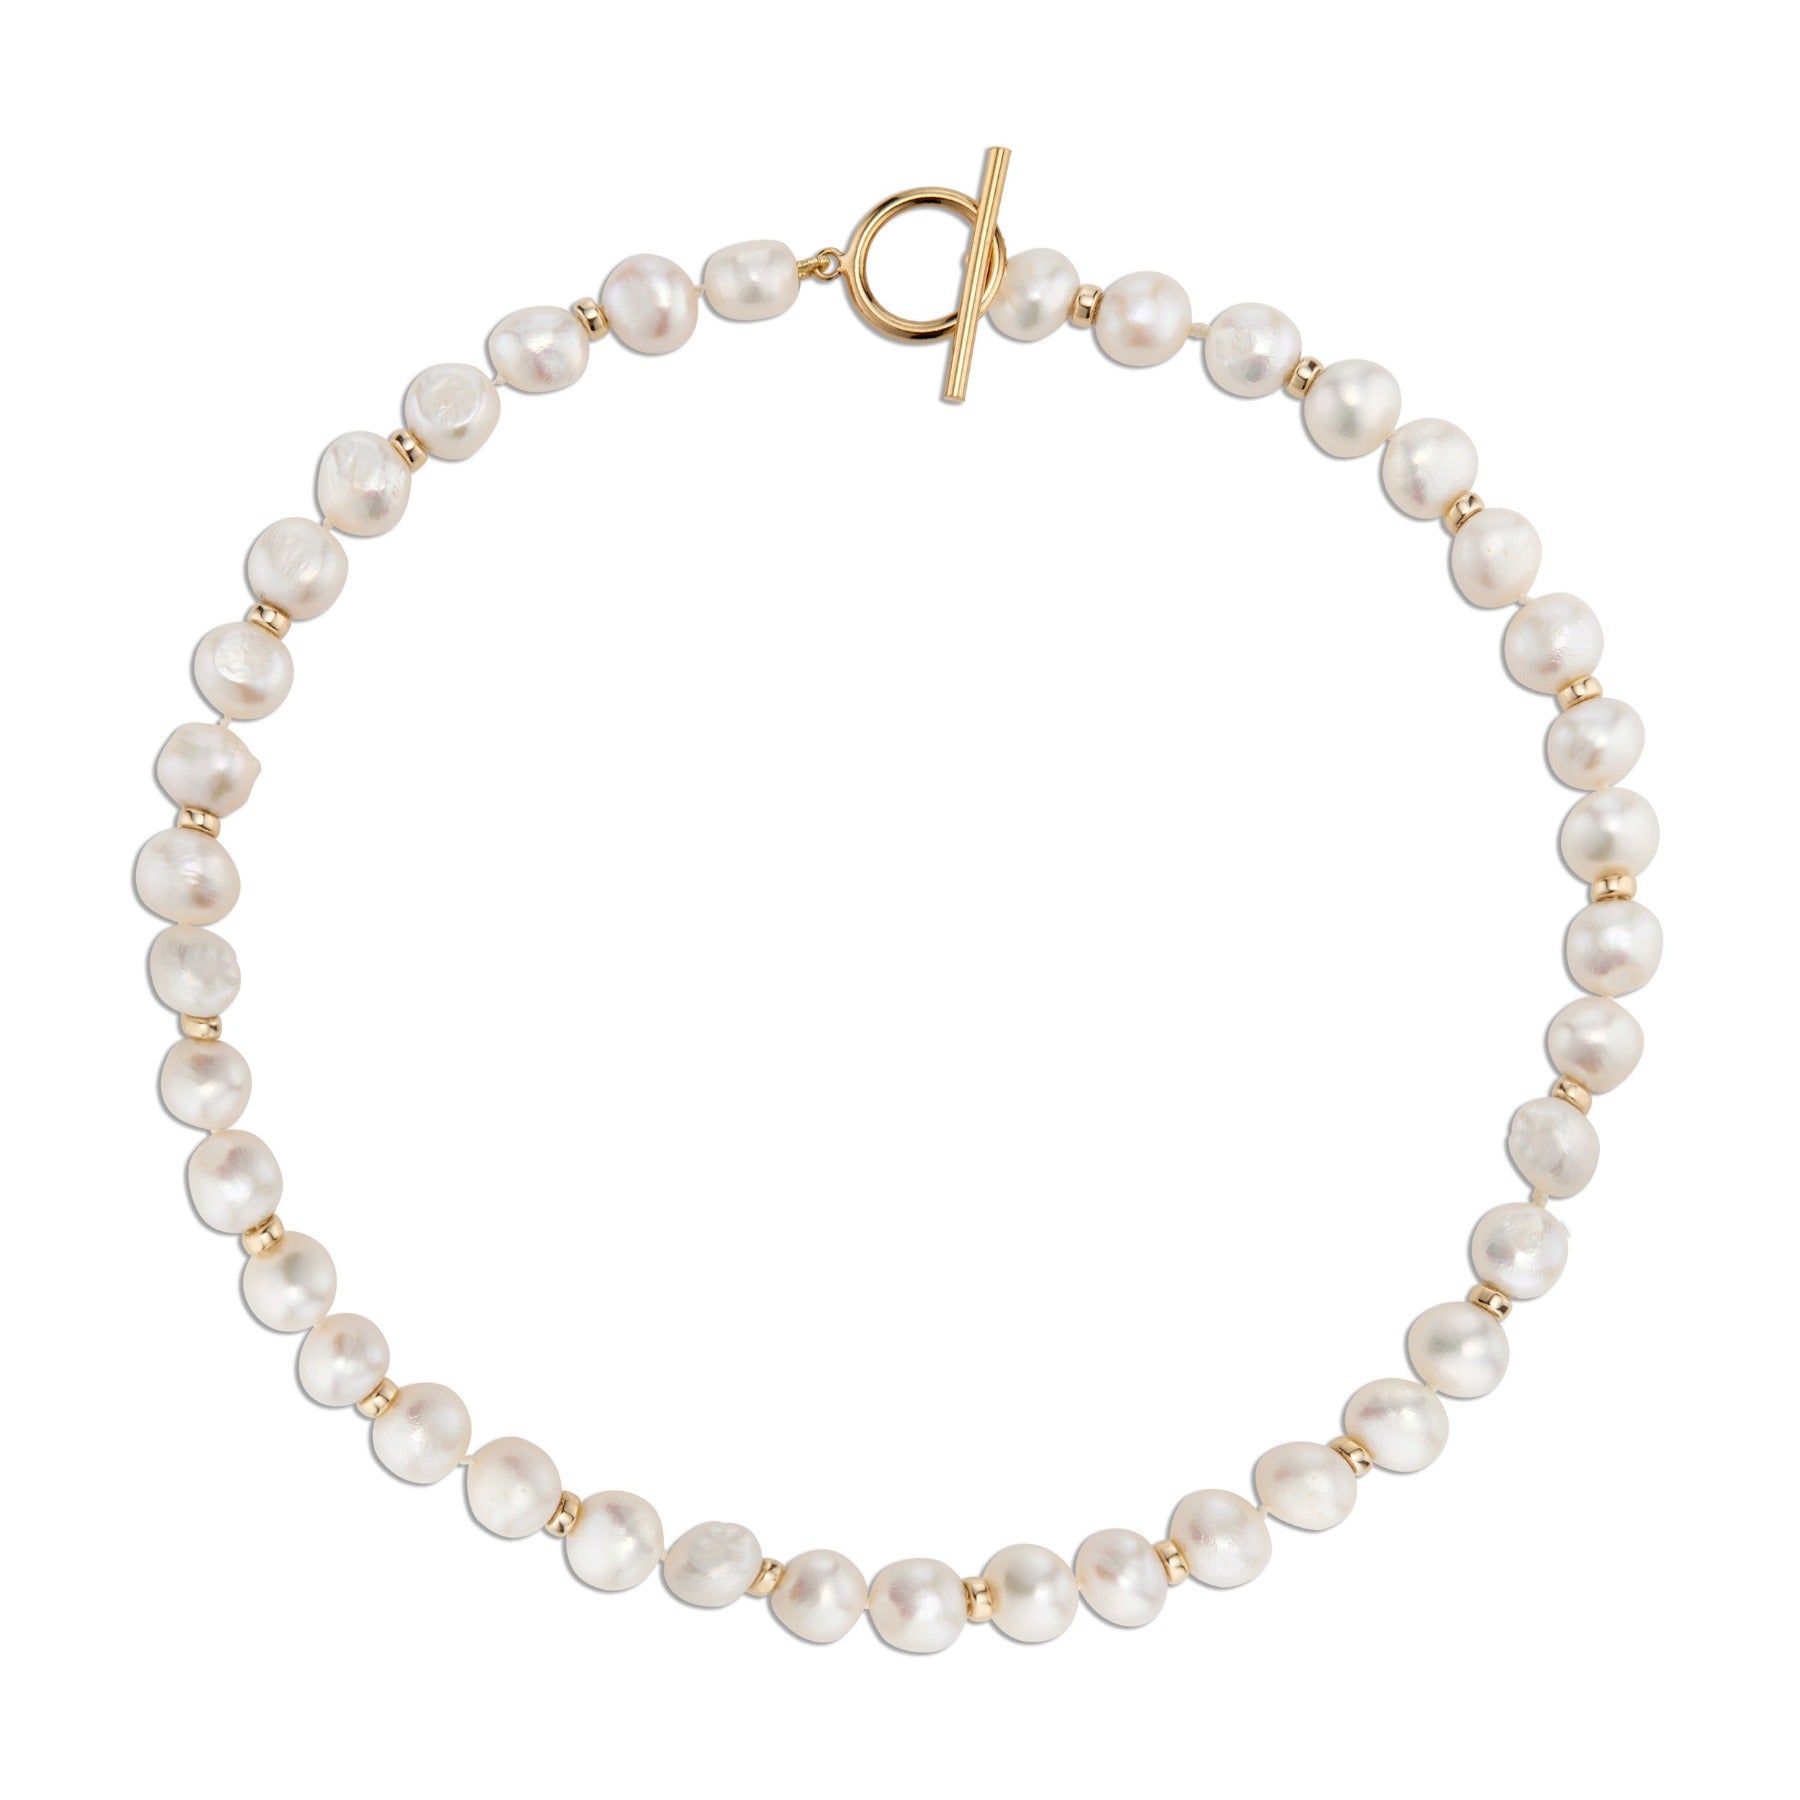 Pearl necklace with gold beads and 14k toggle clasp.